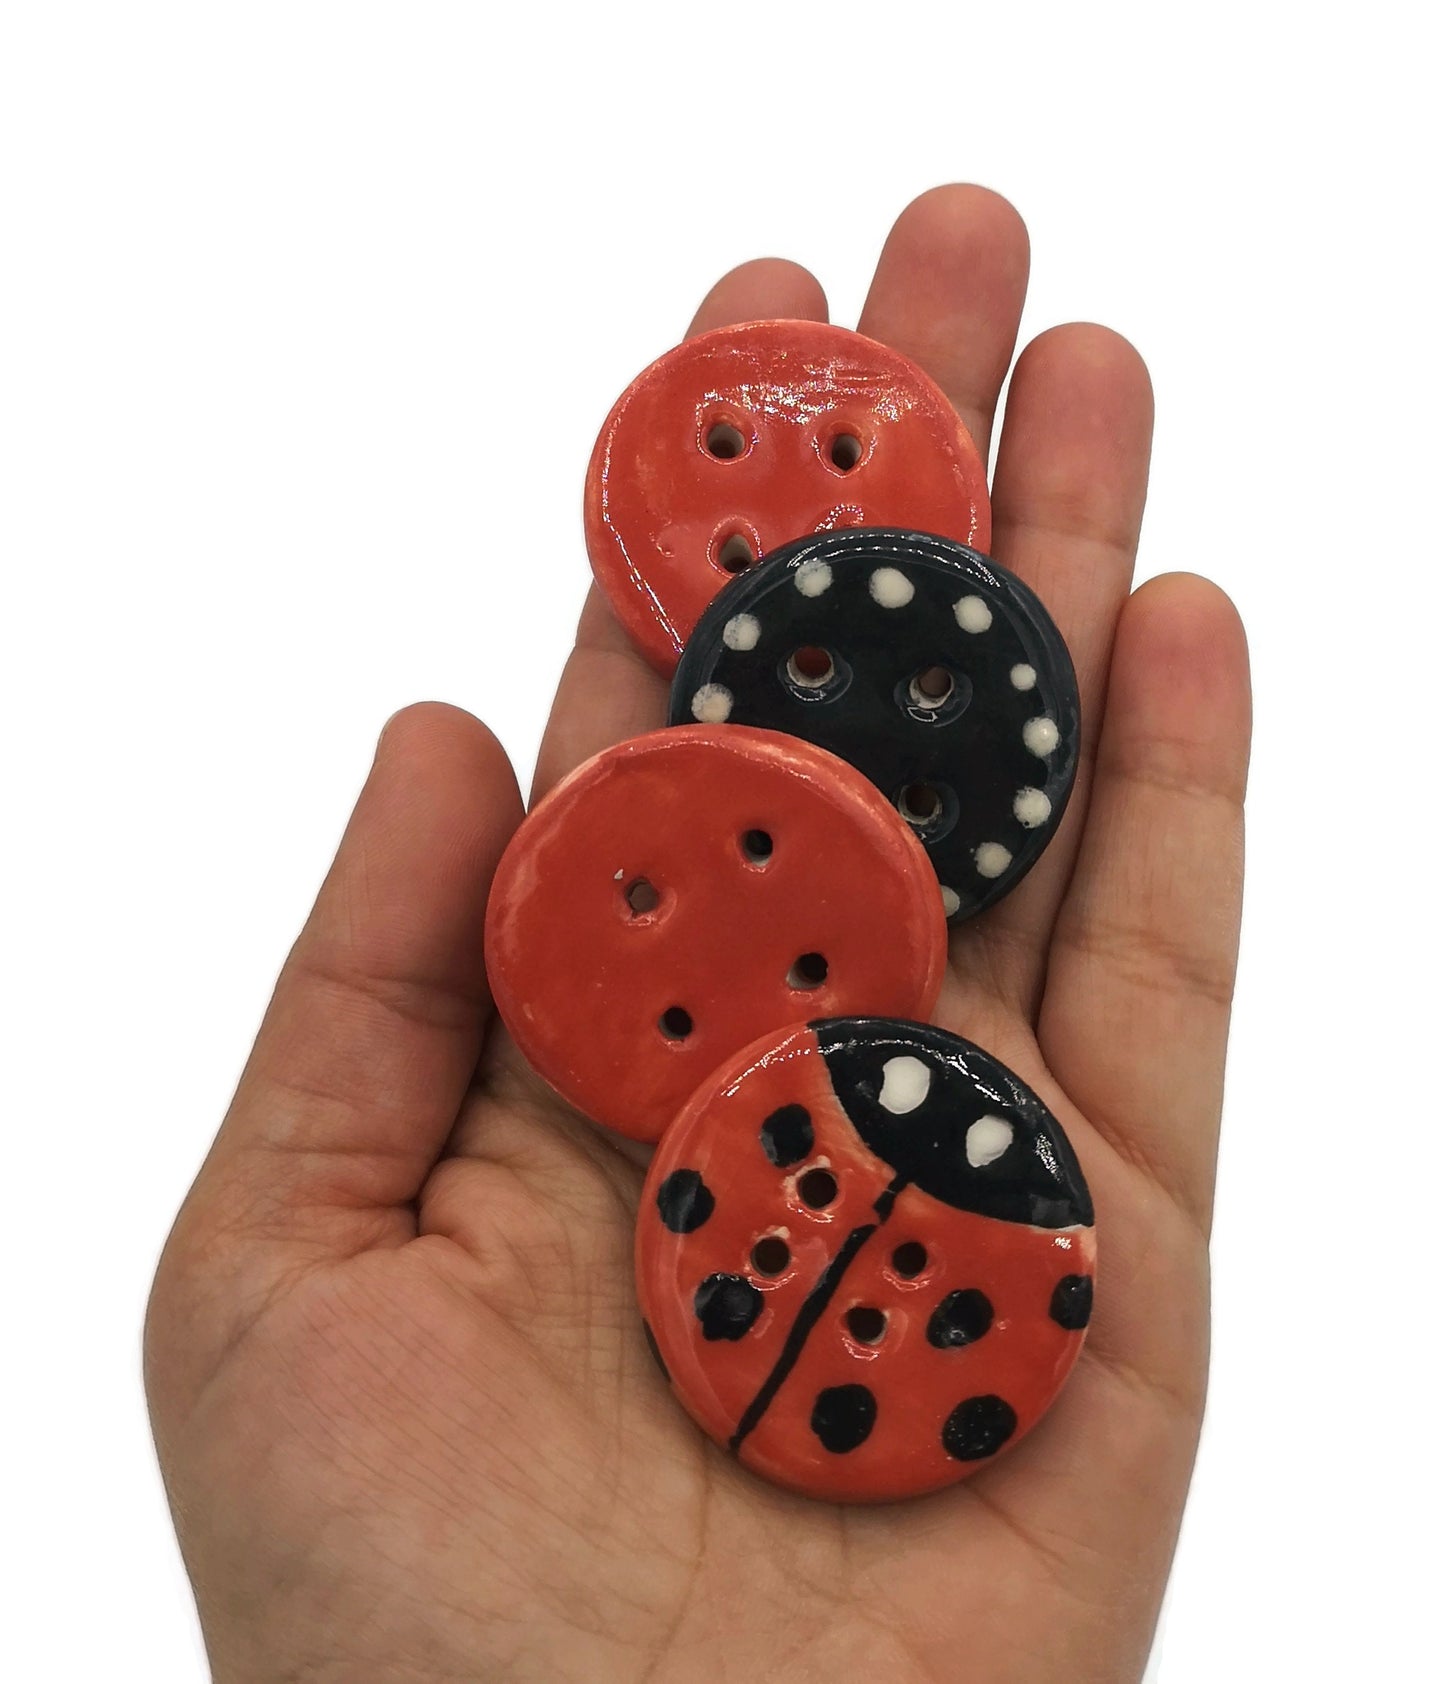 Decorative Buttons Handmade Ceramics, Set Of 4 Round Shape Red Ladybug Buttons Cute, Best Sellers 2022 Extra Large Buttons, Big Buttons - Ceramica Ana Rafael